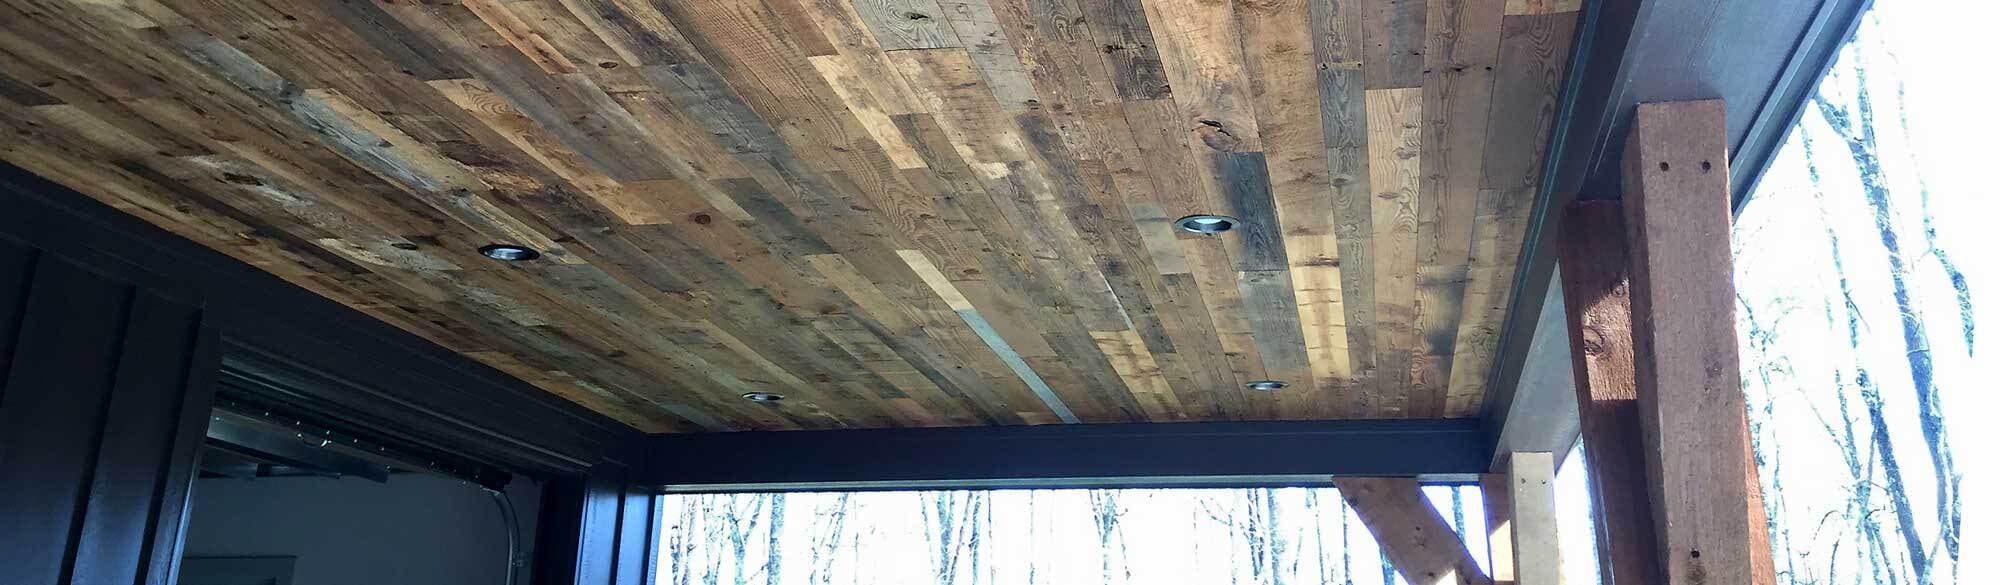 Reclaimed wood for rustic porch ceiling.